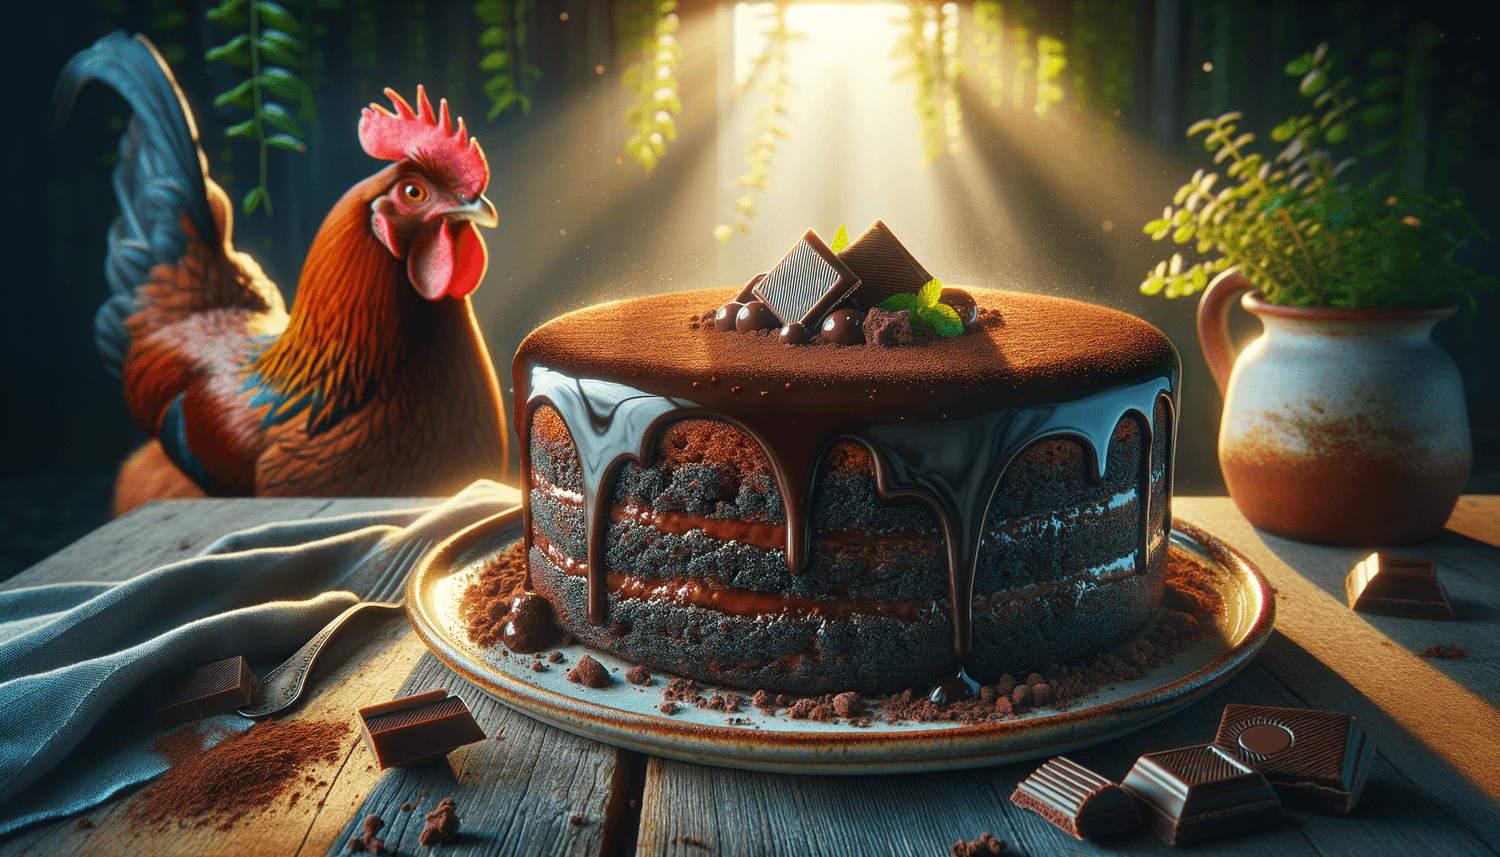 Can Chickens Eat Chocolate Cake?